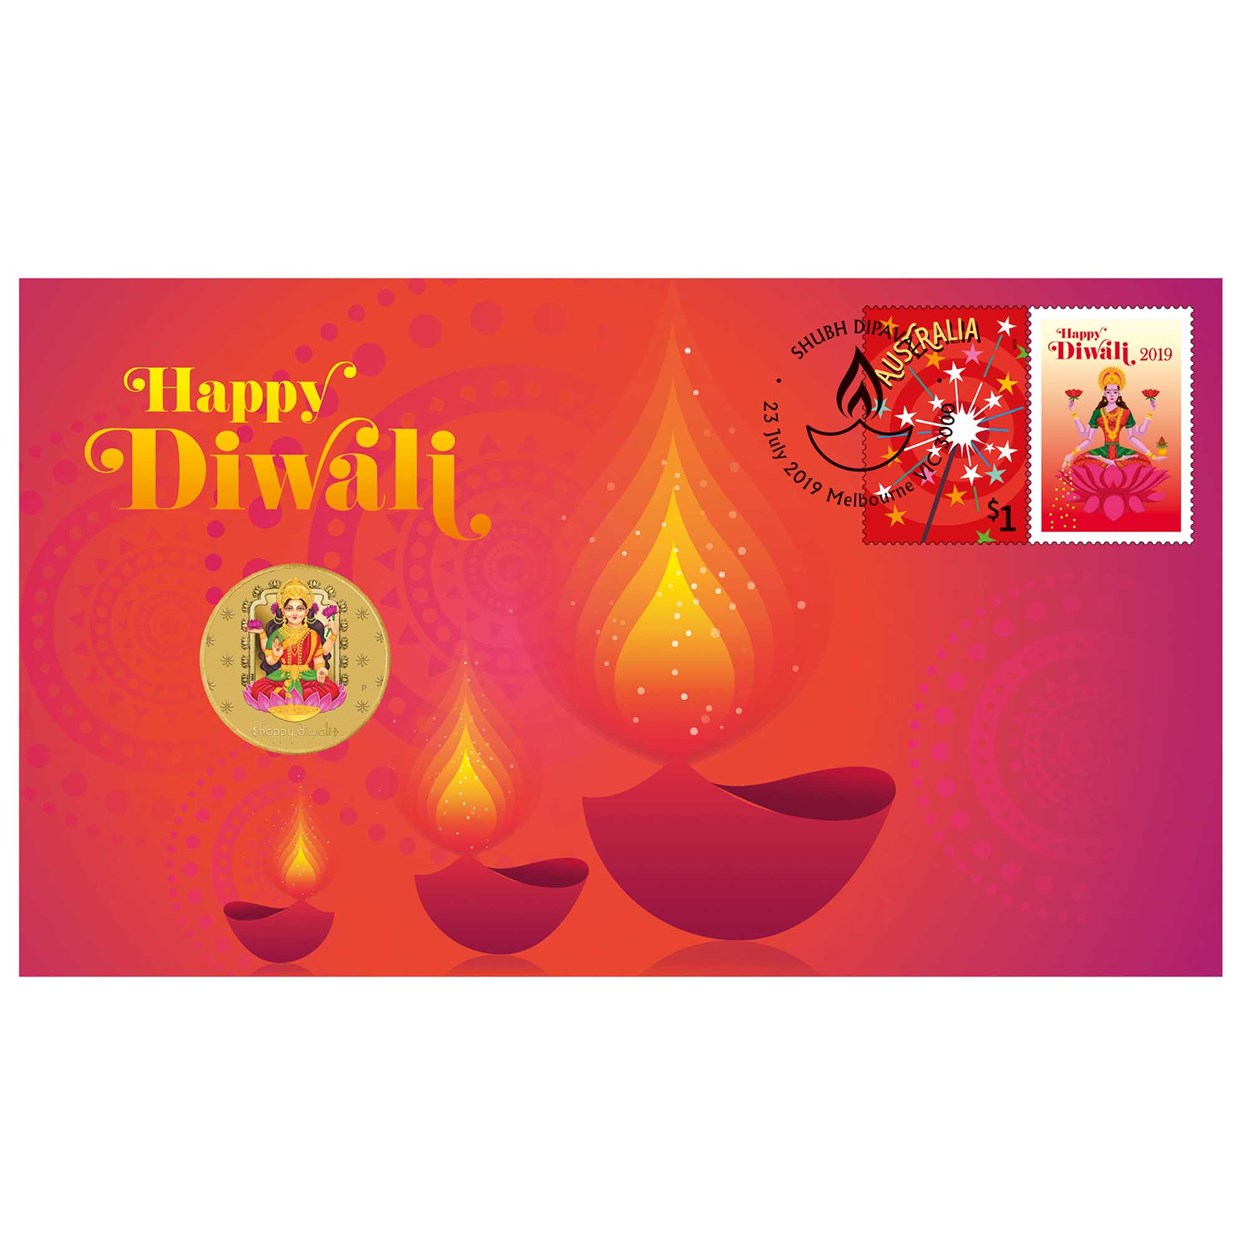 03 diwali 2019 stamp and coin cover